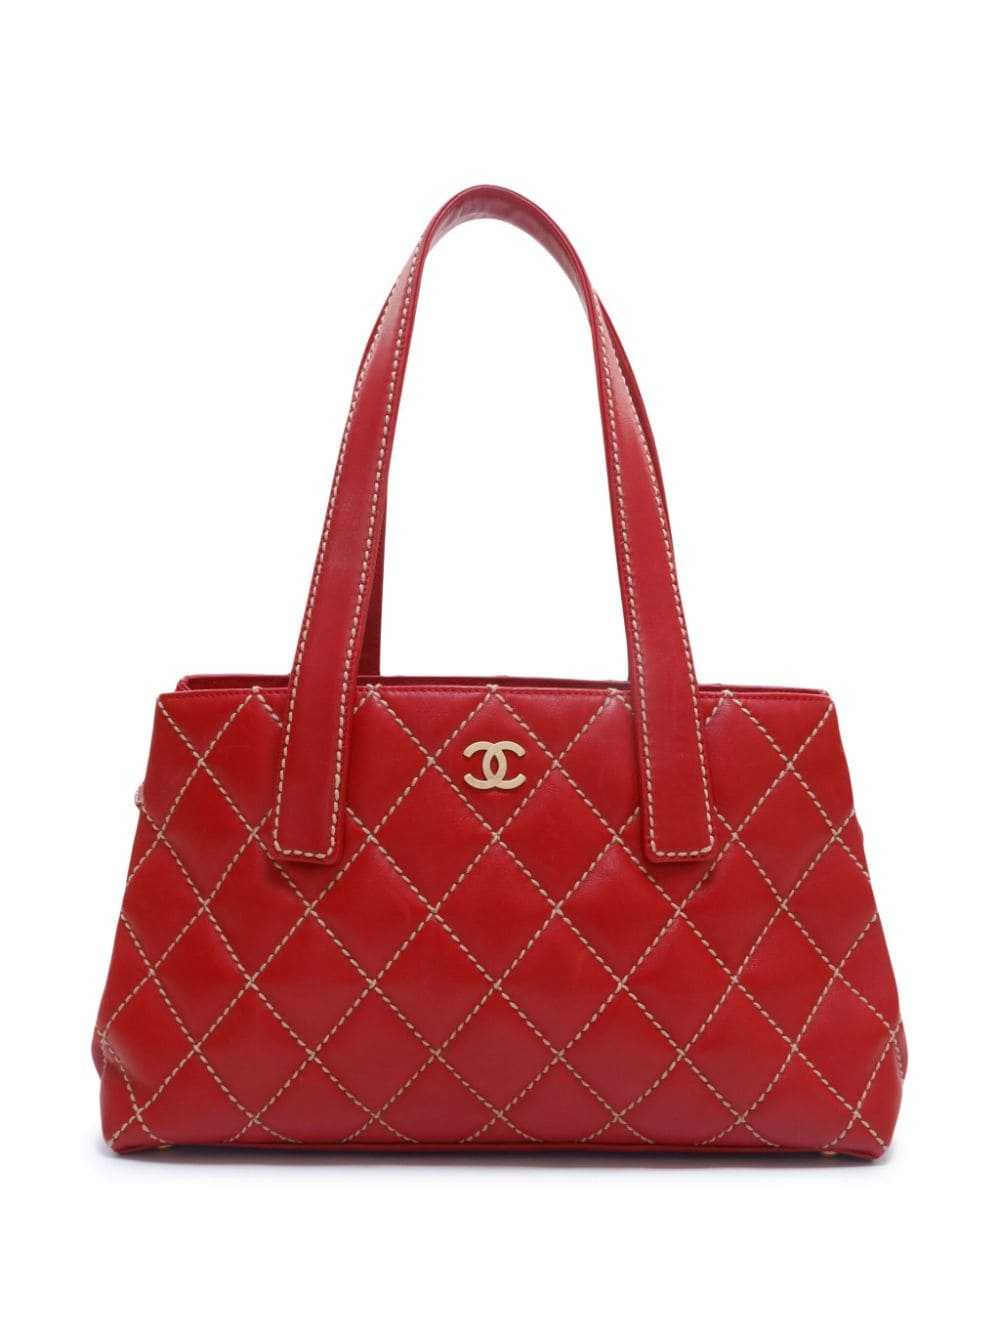 CHANEL Pre-Owned 2002 Wild Stitch tote bag - Red - image 1